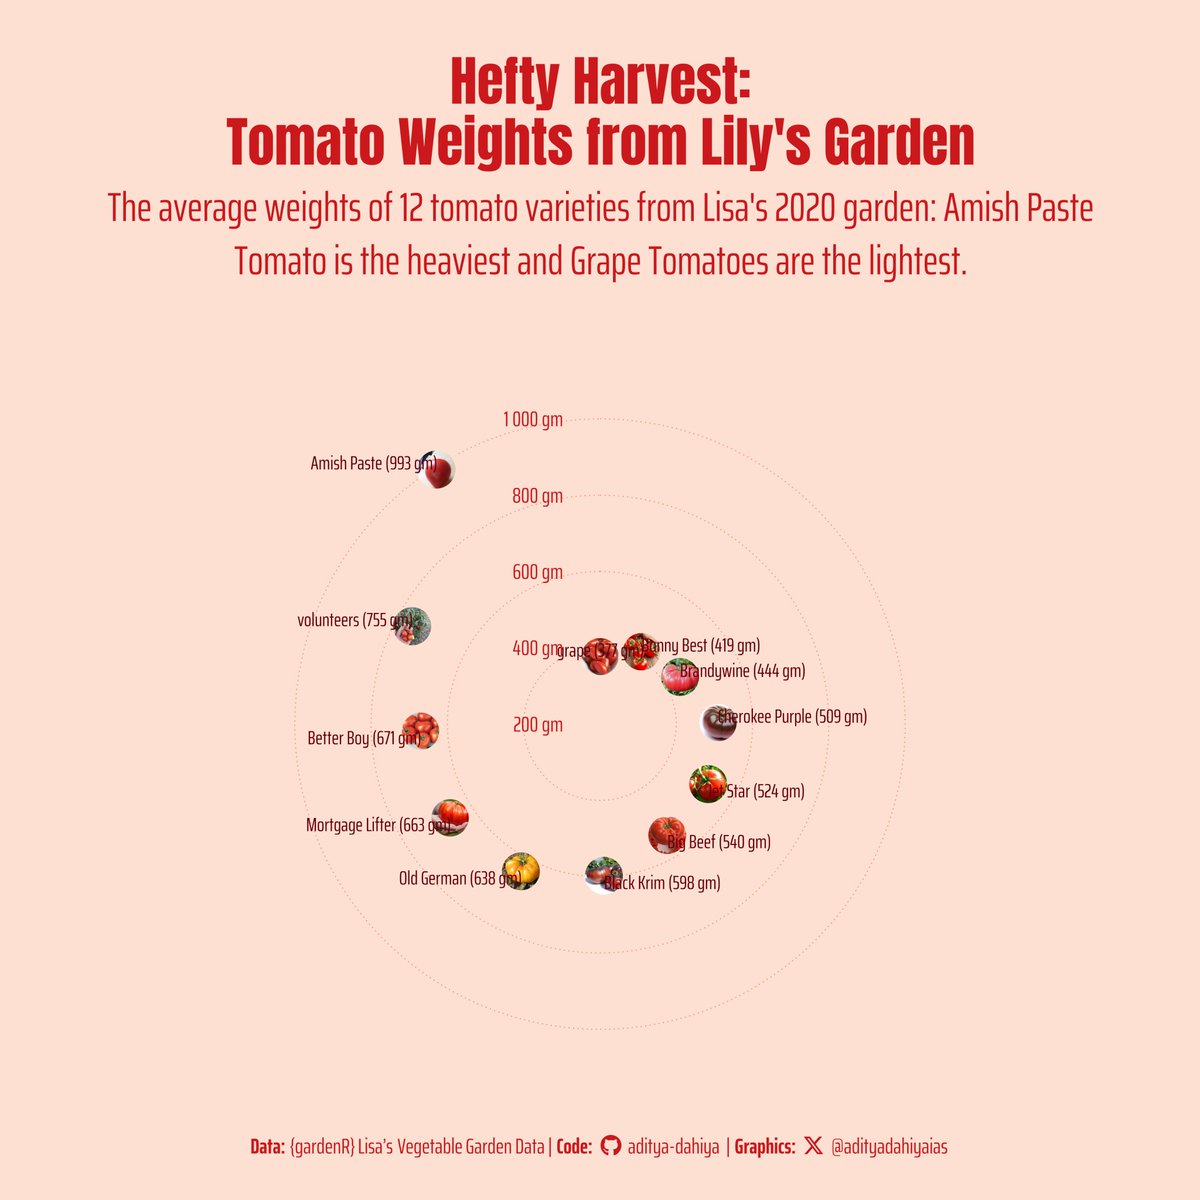 #TidyTuesday A circular plot on the average weights of 12 different tomato varieties harvested in 2020 from Lisa's vegetable garden.
Data: #tidytuesday @lisalendway 
Code: tinyurl.com/tidy-tomatoes
Tools: #ggplot2 #rstats #ggimage @R4DScommunity